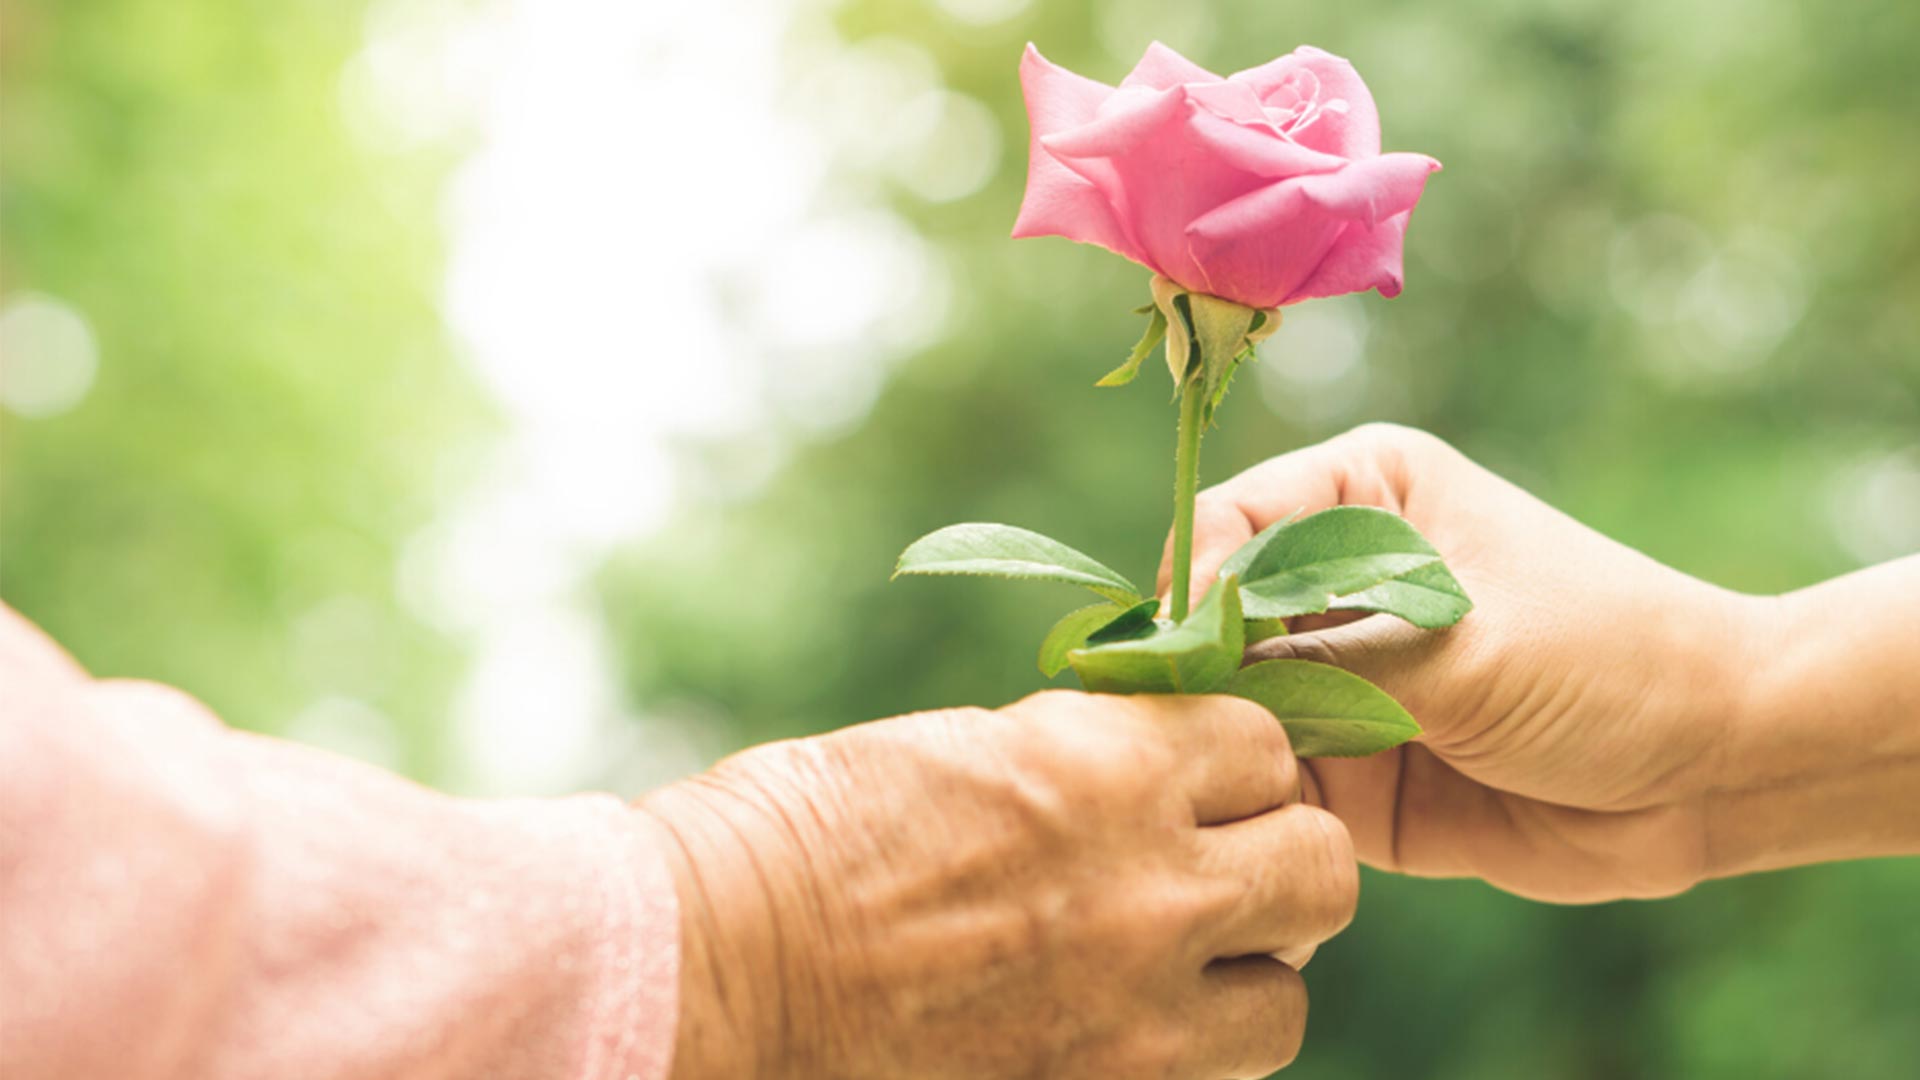 Aged Care Quality Standards: A close up image of two hands, a younger one gifting a pink rose to the older of the two